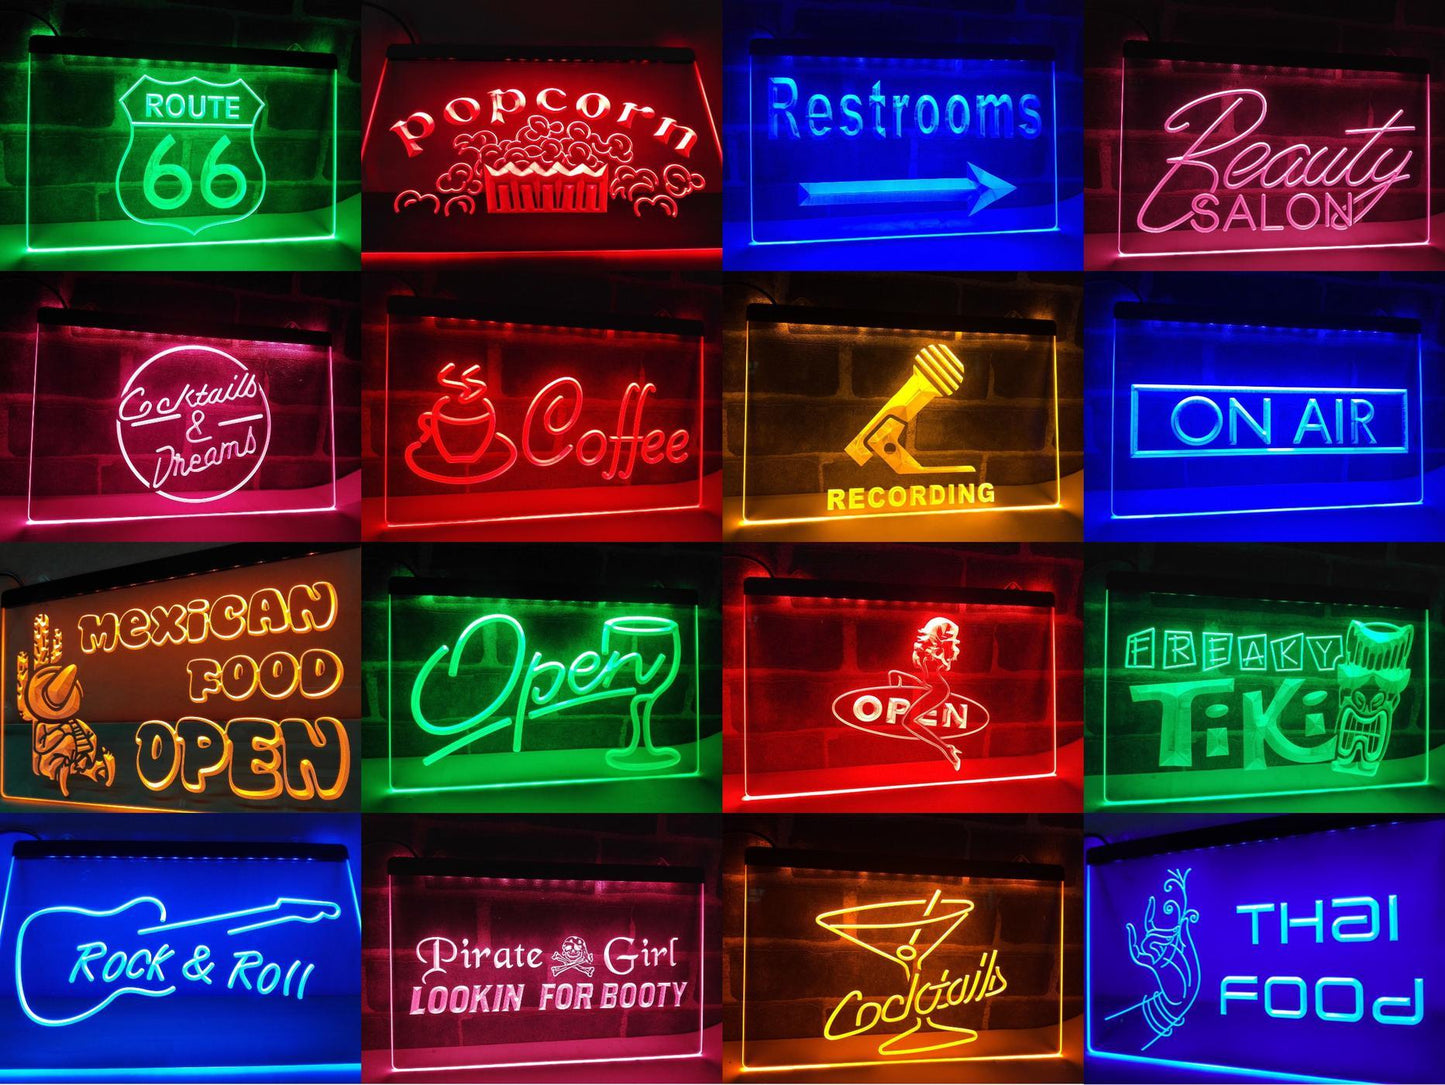 Motorcycles for Sale Repairs LED Neon Light Sign - Way Up Gifts